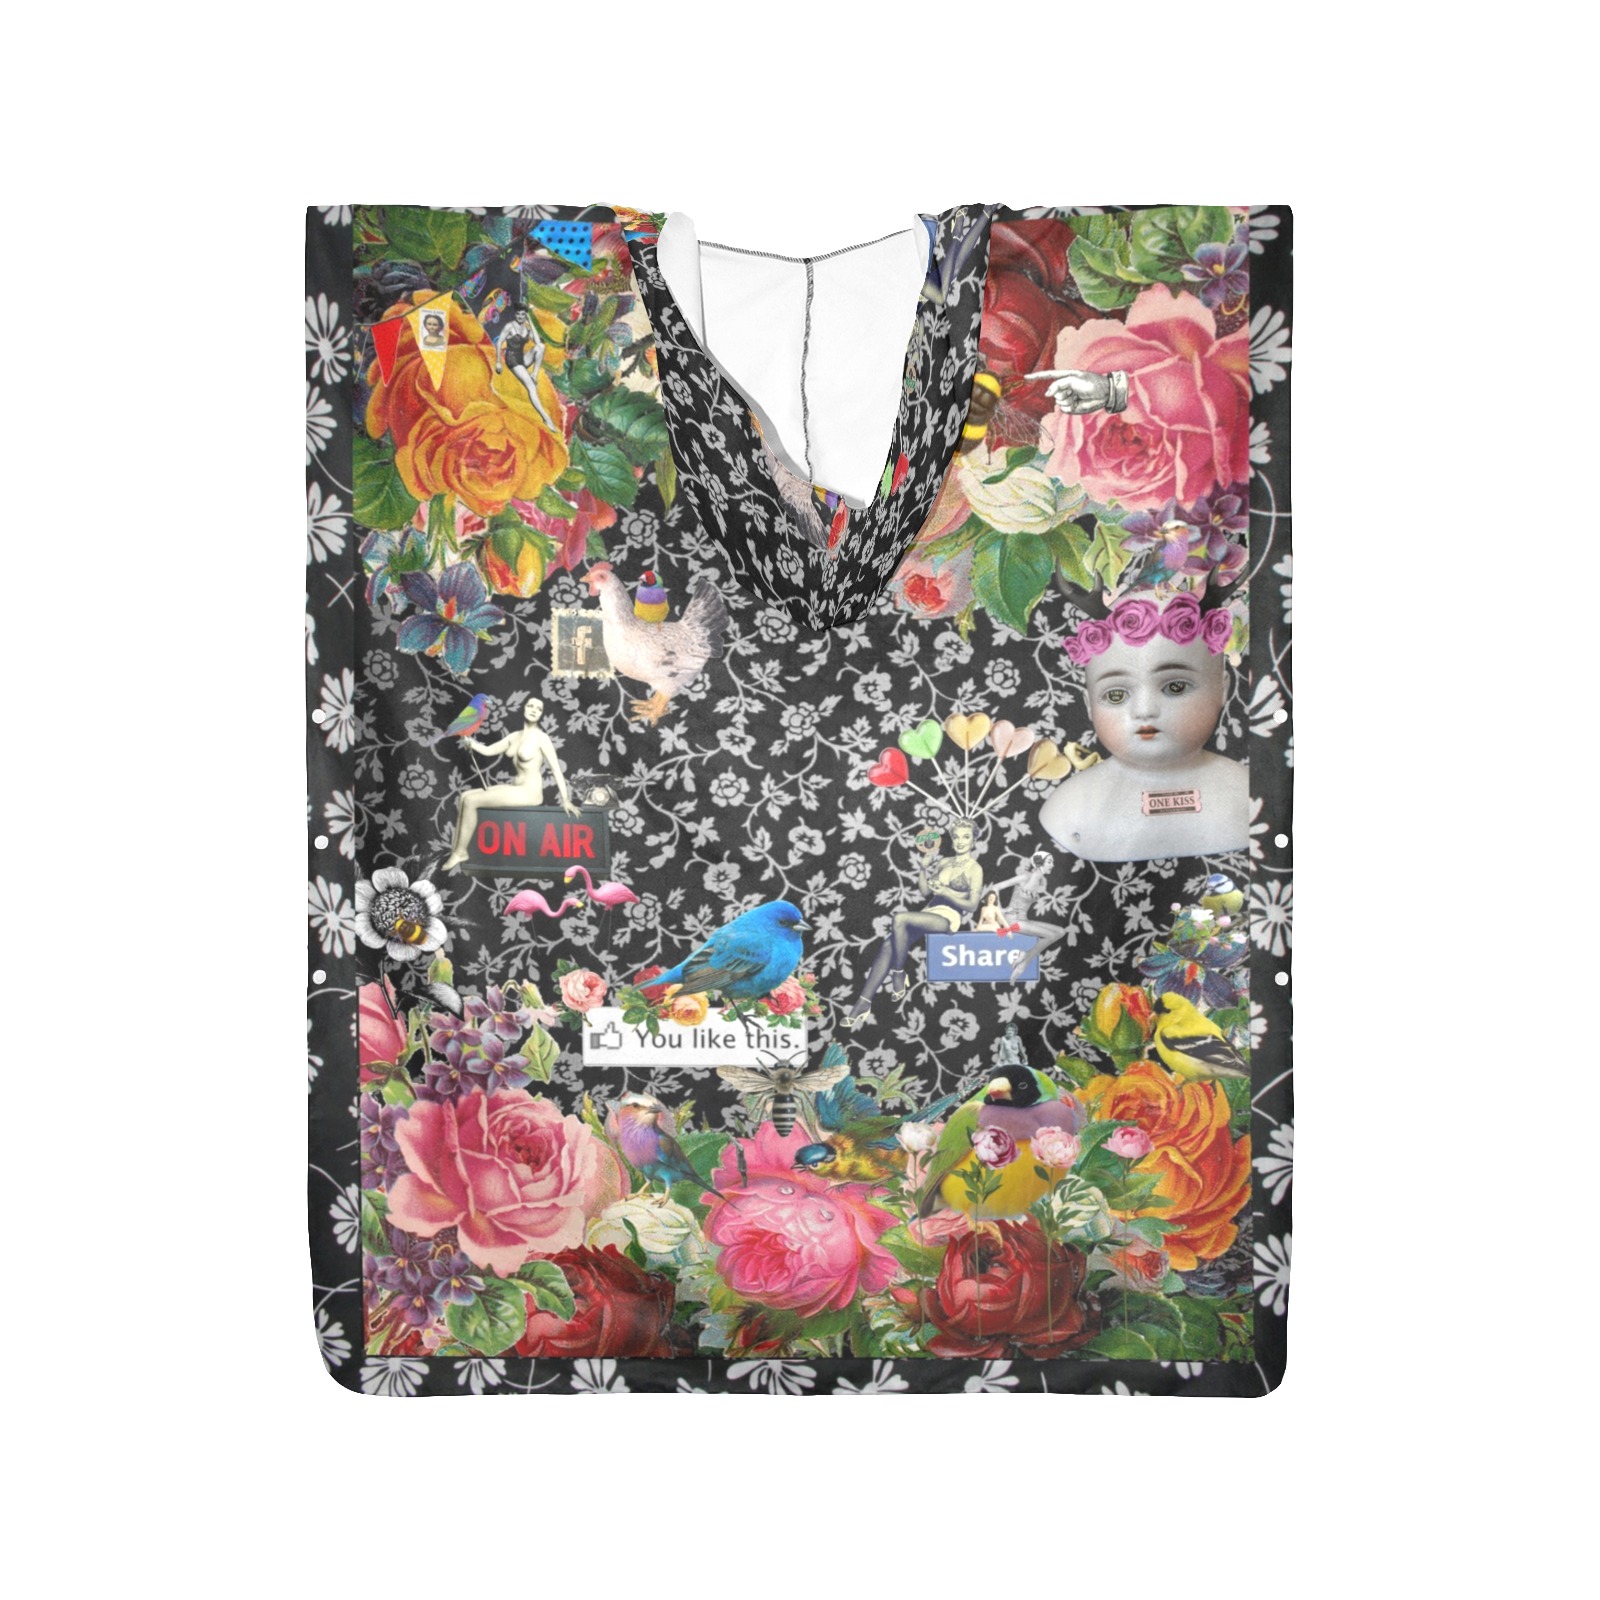 New Floral Design Beach Changing Robe (Large Size)